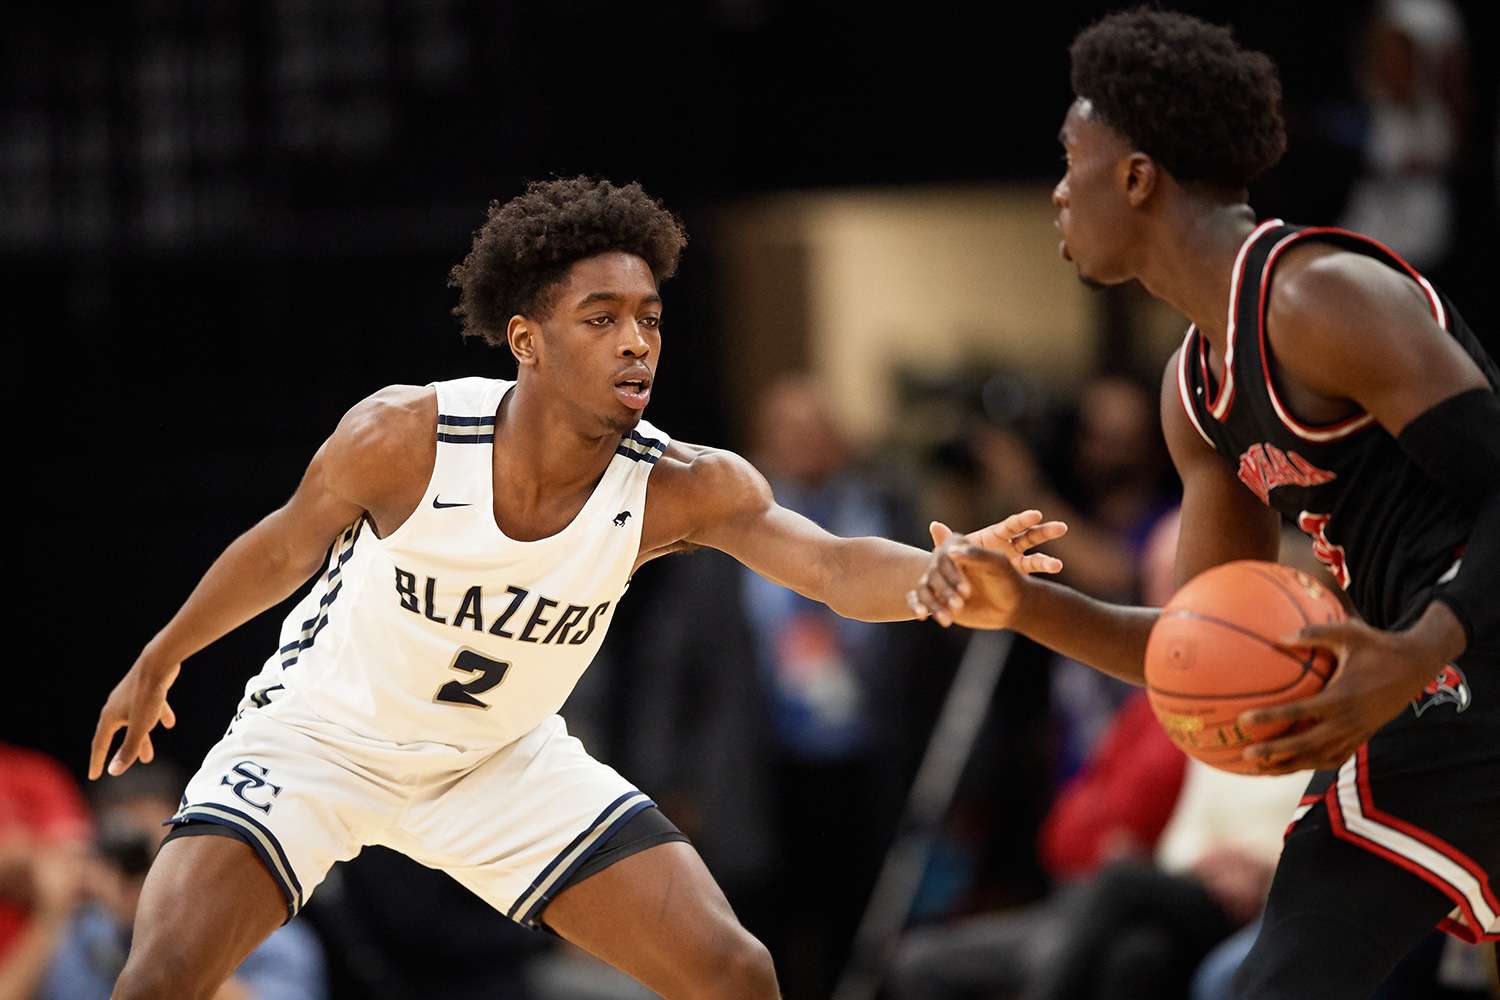 Zaire Wade #2 of Sierra Canyon Trailblazers defends against Prince Aligbe #10 of Minnehaha Academy Red Hawks during the game at Target Center on January 04, 2020 in Minneapolis, Minnesota